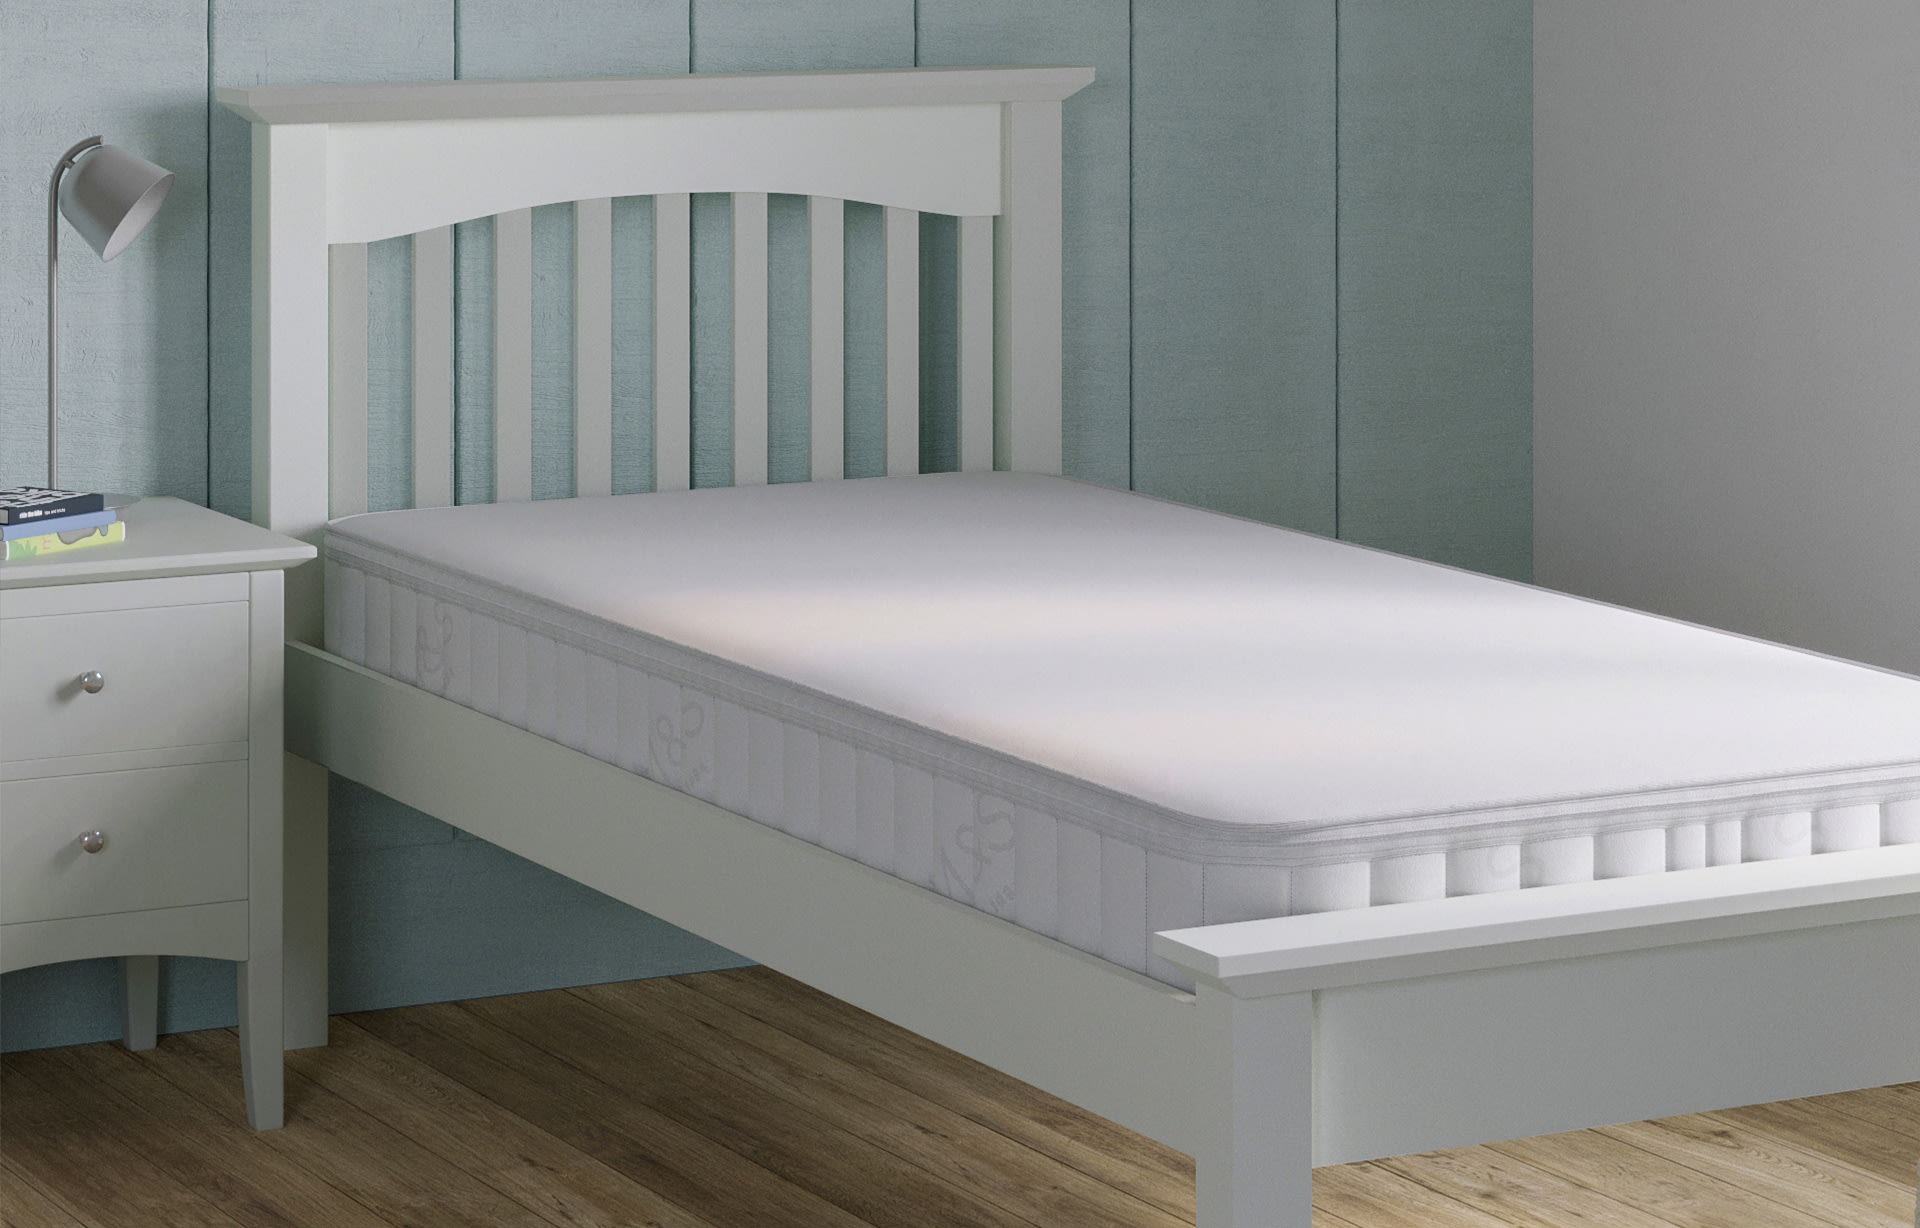 Easy Clean Mattress with Removable Cover 3 of 5